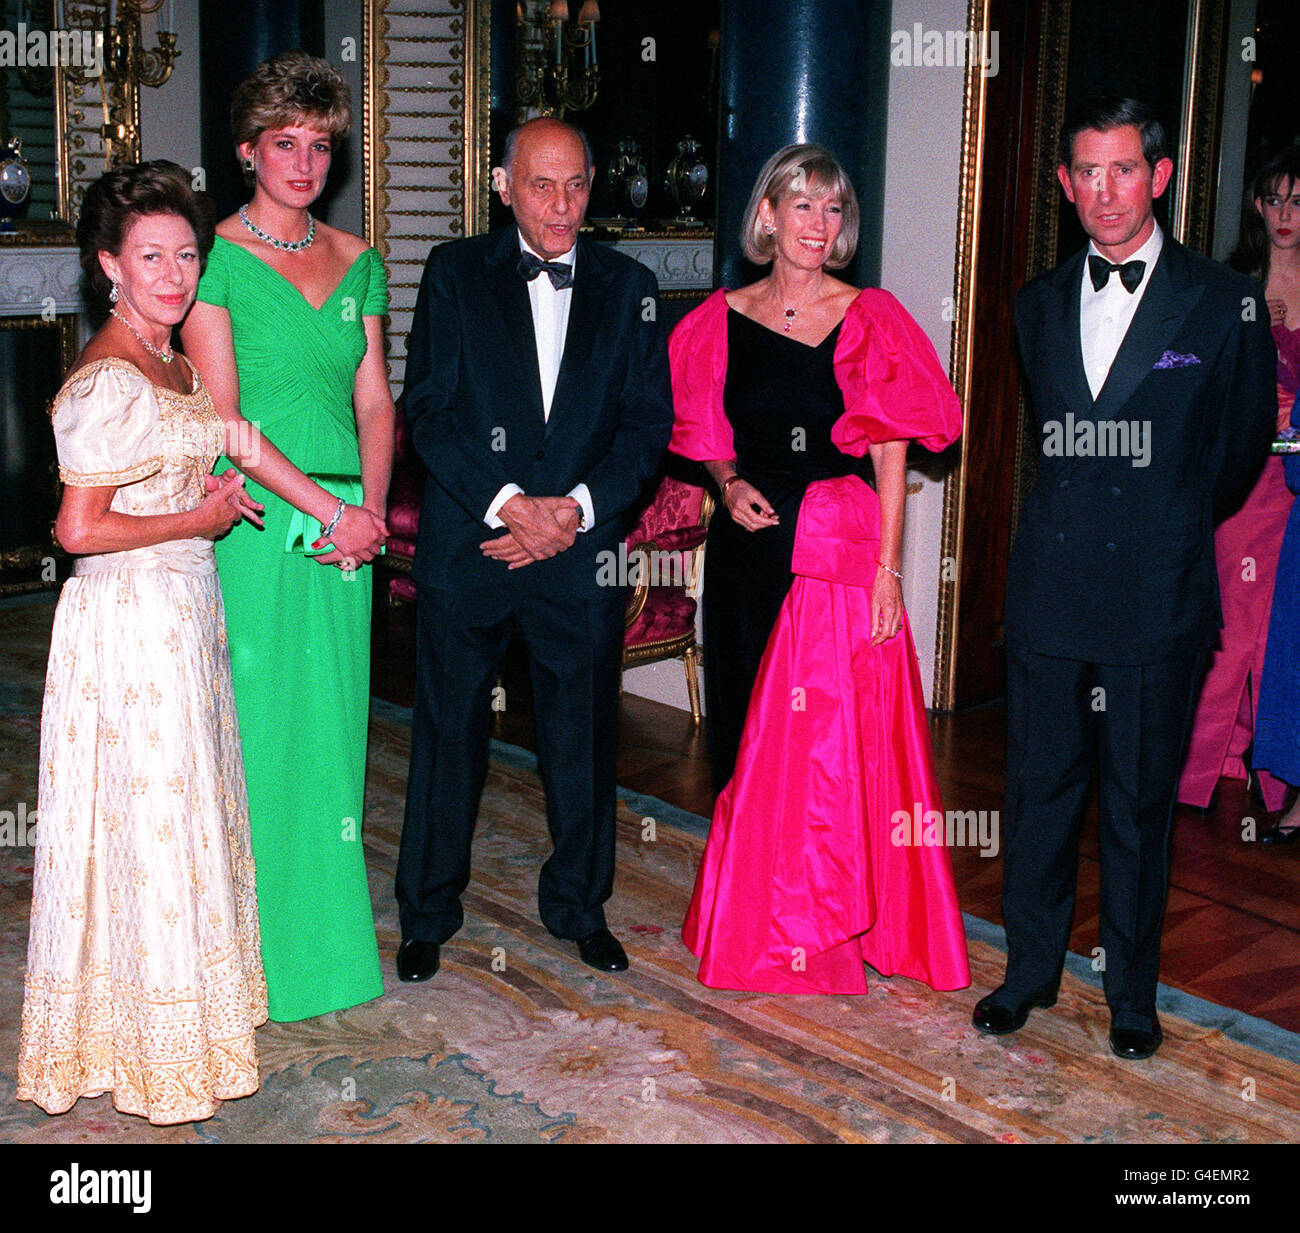 PA NEWS 22/10/92 L-R: PRINCESS MARGARET, THE PRINCESS OF WALES, SIR GEORGE SOLTI, LADY SOLTI AND THE PRINCE OF WALES AT BUCKINGHAM PALACE FOR SIR GEORGE SOLTI'S 8OTH BIRTHDAY PARTY. Stock Photo